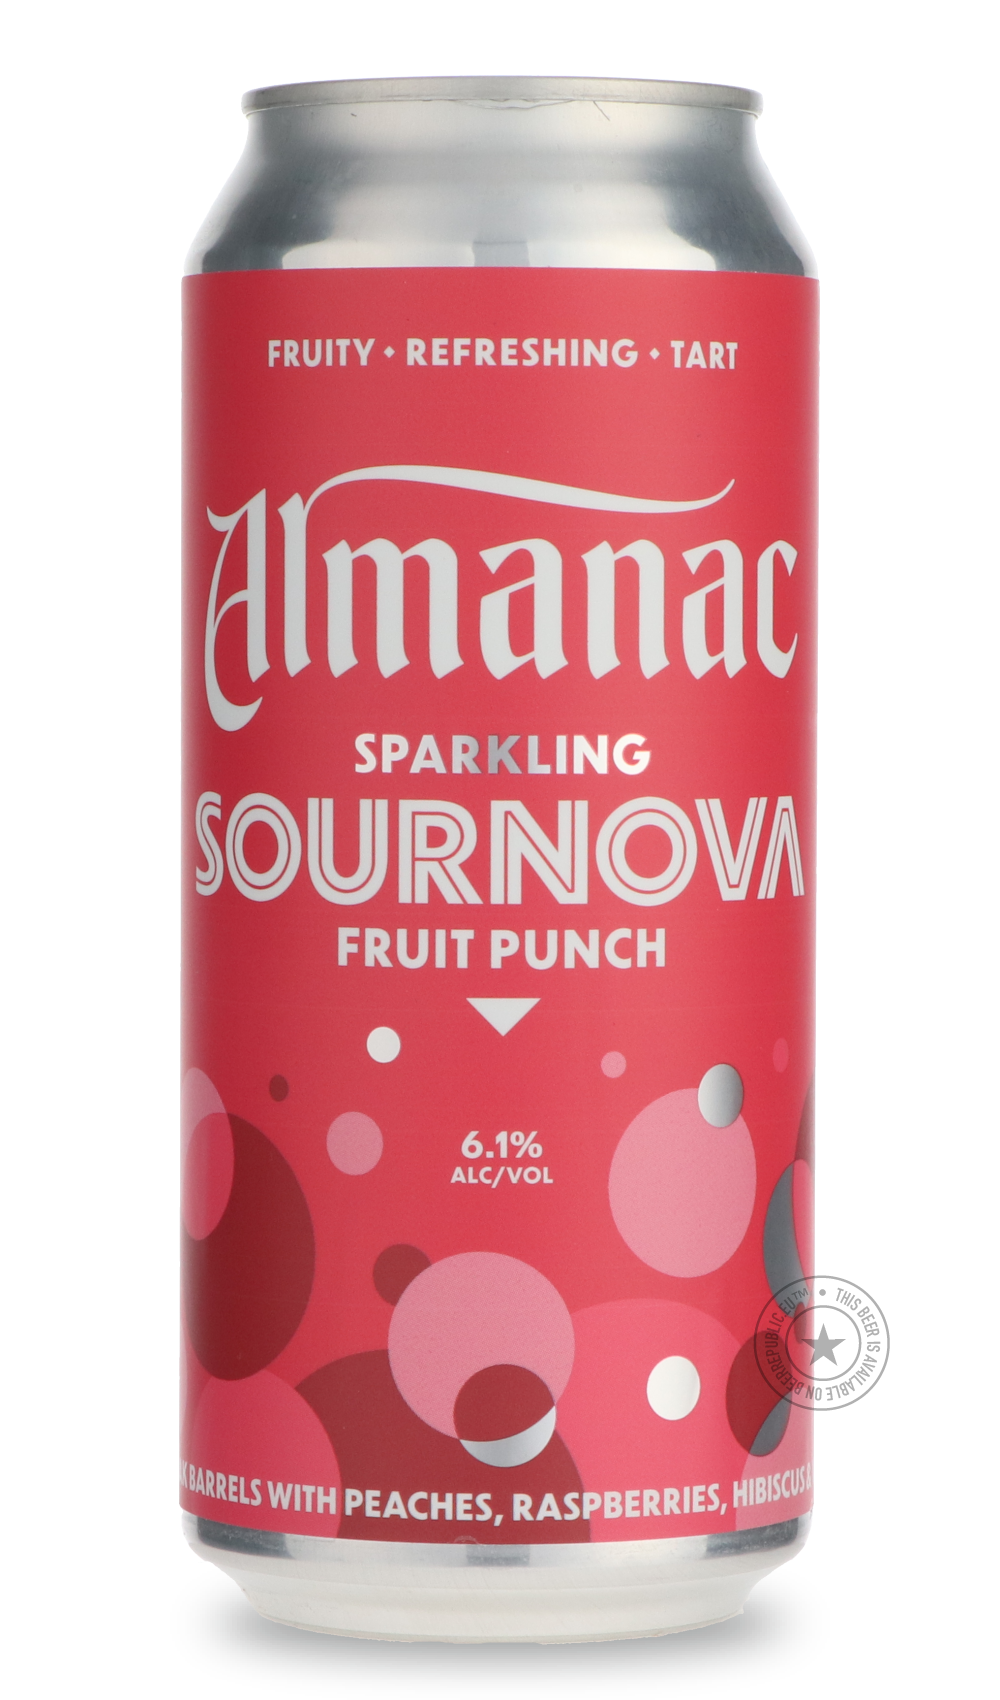 -Almanac- Fruit Punch Sournova-Sour / Wild & Fruity- Only @ Beer Republic - The best online beer store for American & Canadian craft beer - Buy beer online from the USA and Canada - Bier online kopen - Amerikaans bier kopen - Craft beer store - Craft beer kopen - Amerikanisch bier kaufen - Bier online kaufen - Acheter biere online - IPA - Stout - Porter - New England IPA - Hazy IPA - Imperial Stout - Barrel Aged - Barrel Aged Imperial Stout - Brown - Dark beer - Blond - Blonde - Pilsner - Lager - Wheat - We